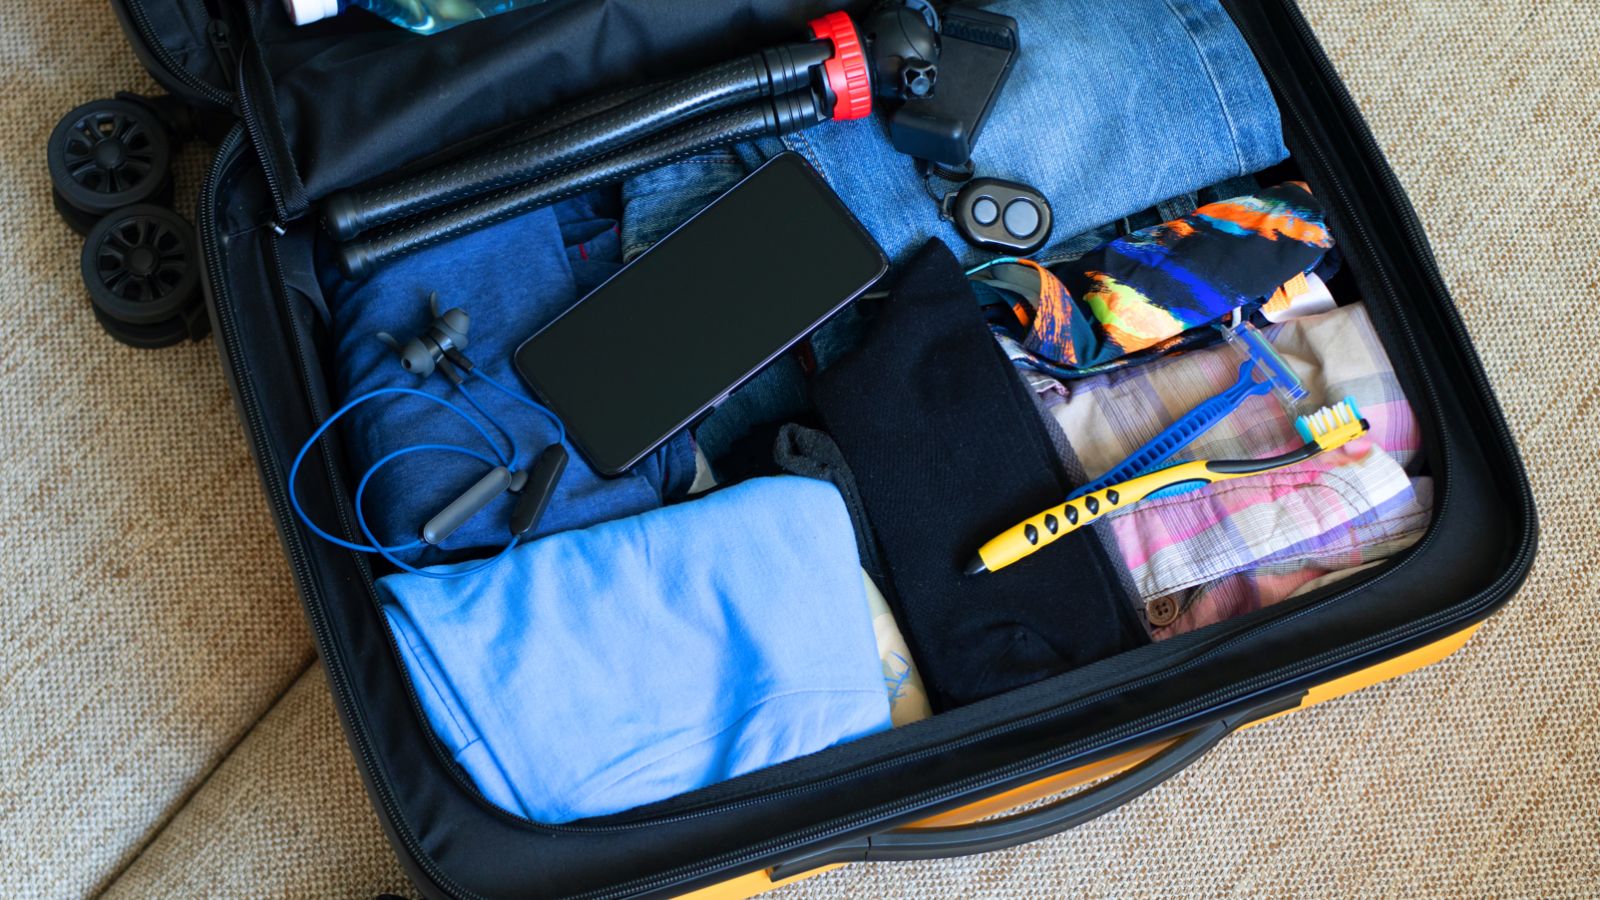 <p>One thing that bothers TSA agents is when carry-on bags are stuffed with personal belongings. It makes it difficult for them to quickly and efficiently scan and identify the items inside. It is always important to <a href="https://www.travelandleisure.com/travel-tips/airport-security-tsa-mistakes-to-avoid">pack your carry bags properly</a> and make sure your items are easy to reach or remove for the TSA agents.</p>